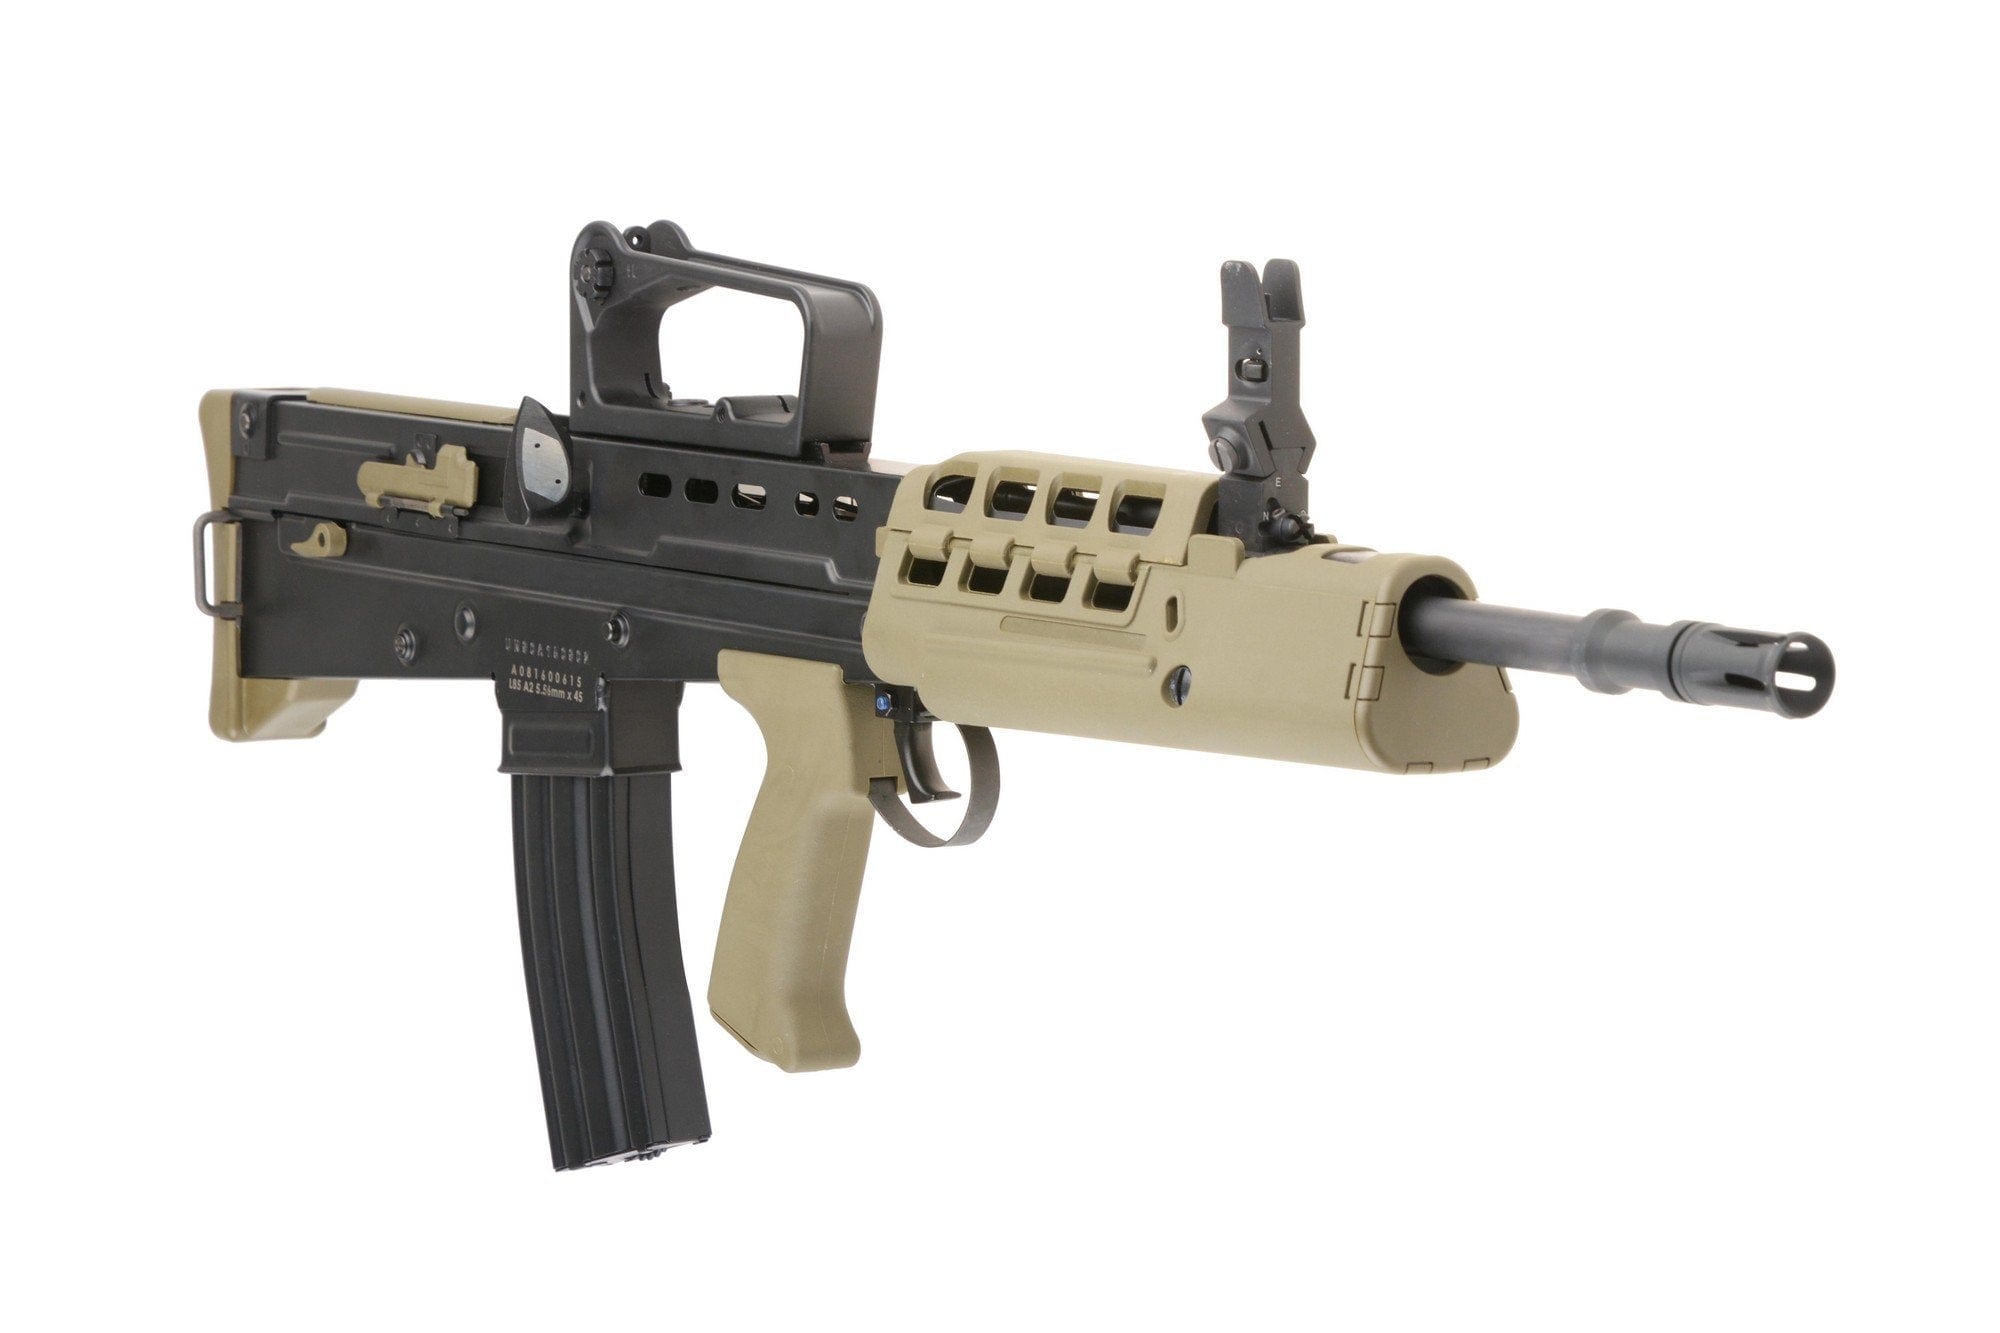 L85A2 Assault Rifle Replica by ICS on Airsoft Mania Europe